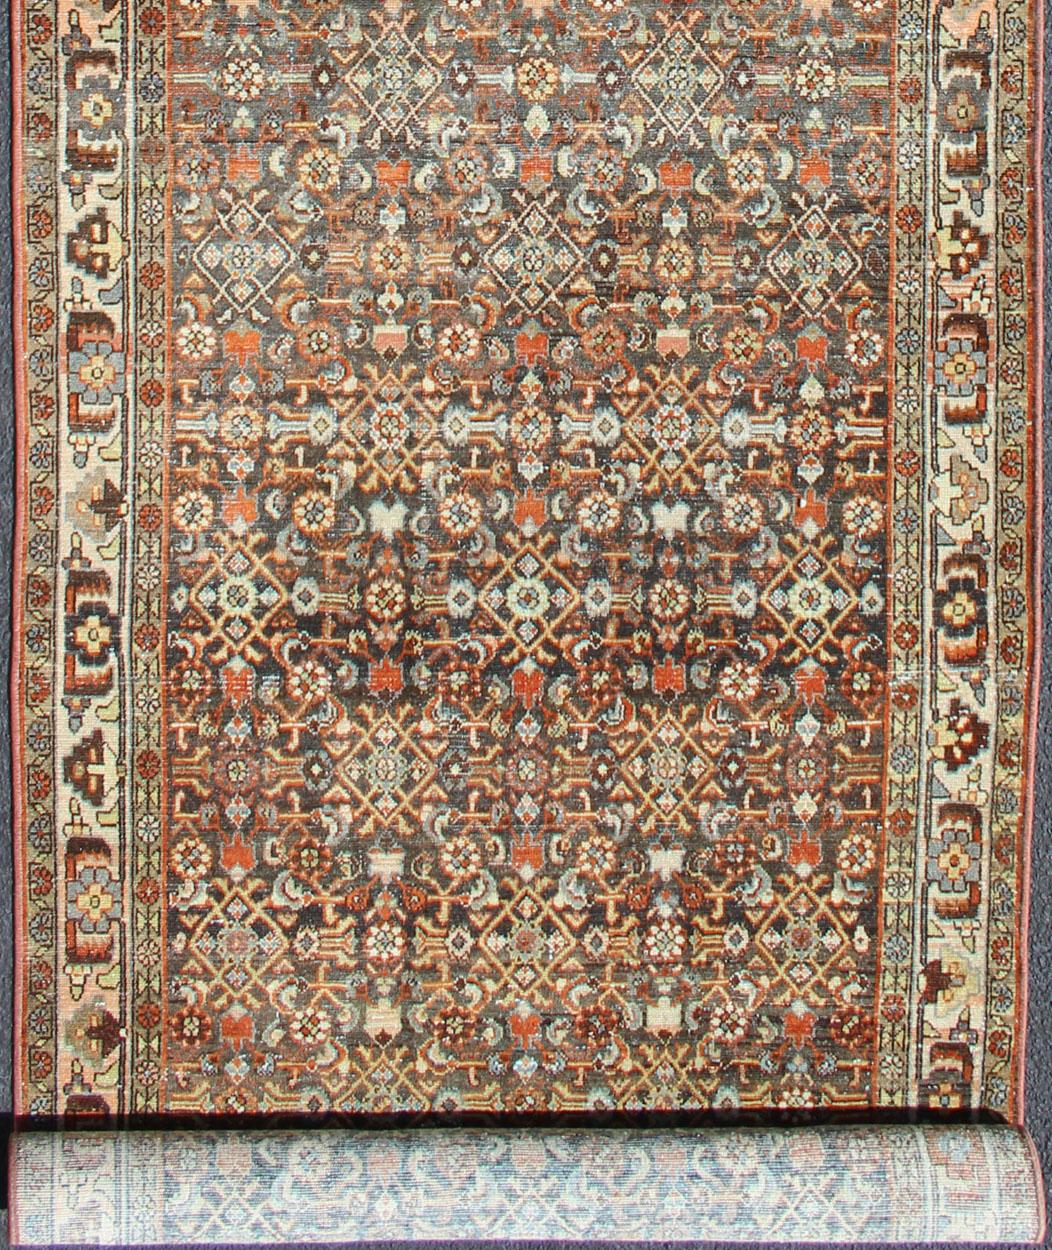 Long Persian Malayer runner with geometric motifs, rug SUS-1908-212, country of origin / type: Iran / Malayer, circa 1920

This long antique Persian Malayer runner, circa 1920s, is an intricate and unique piece. The central field plays host to an